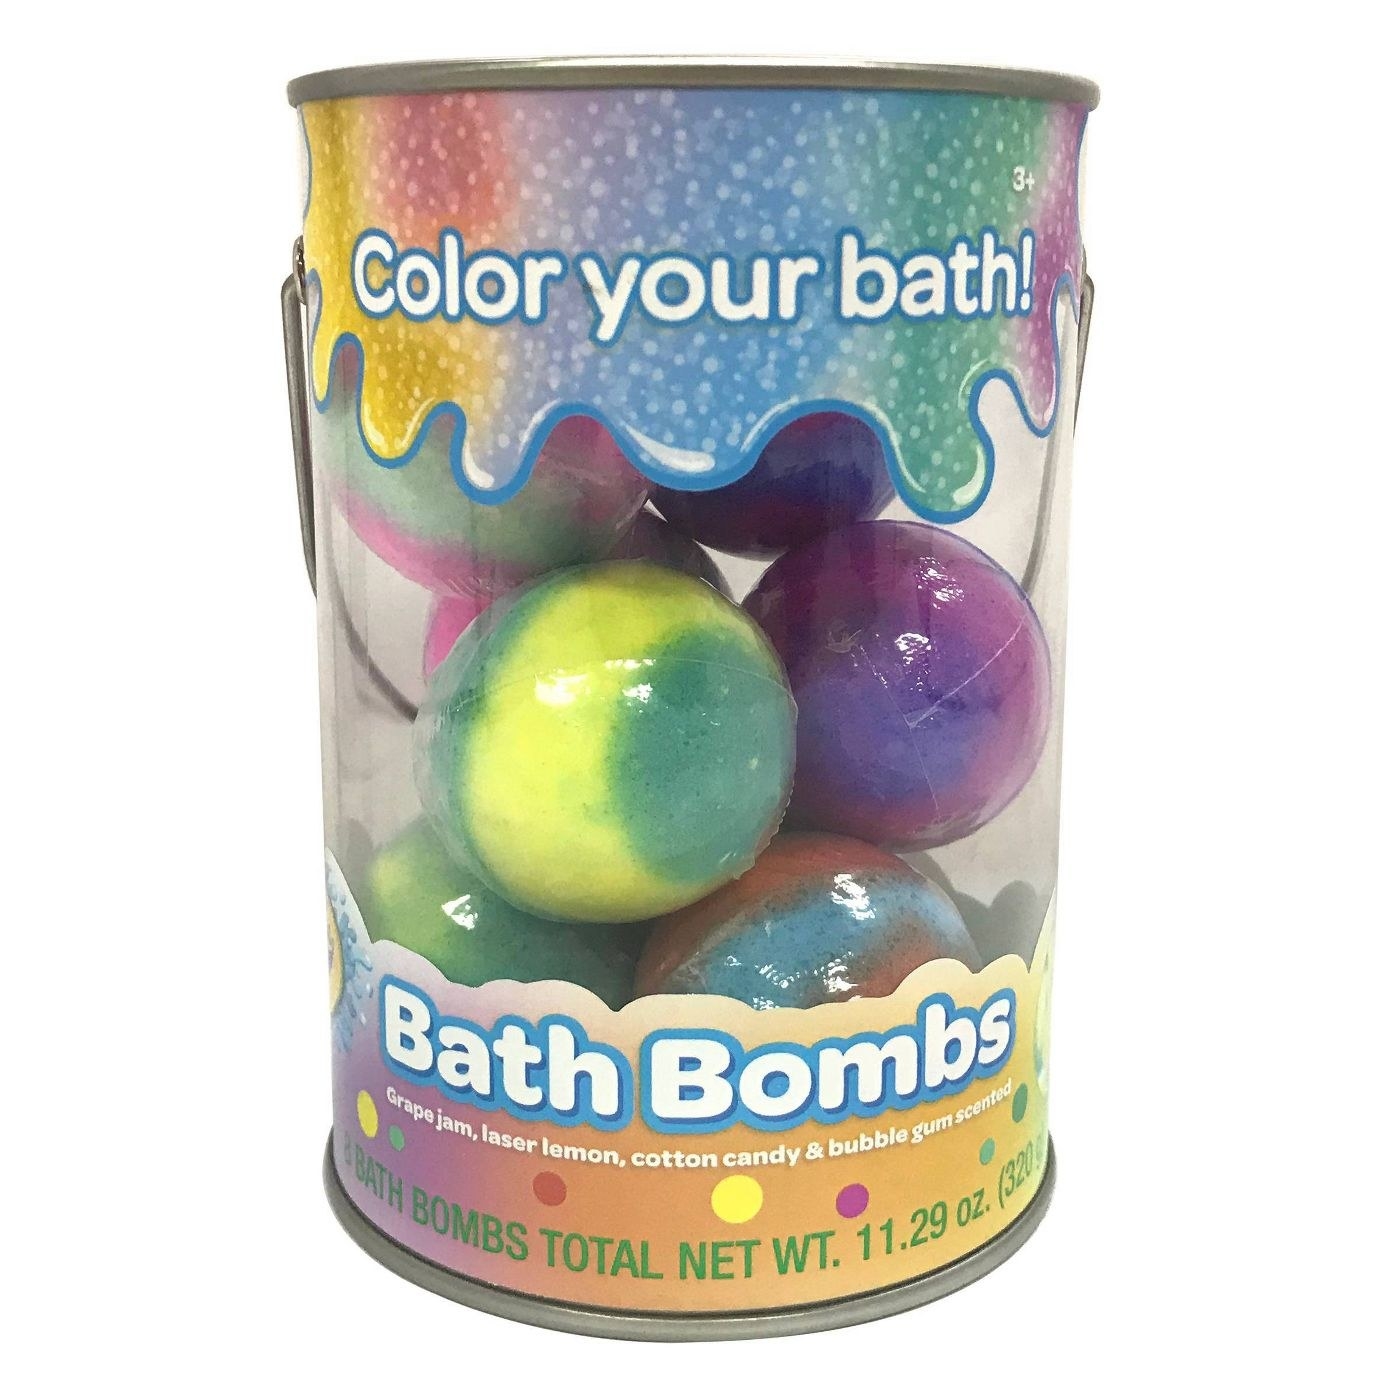 Colorful bath bombs in red and blue, green and yellow, and pink and purple